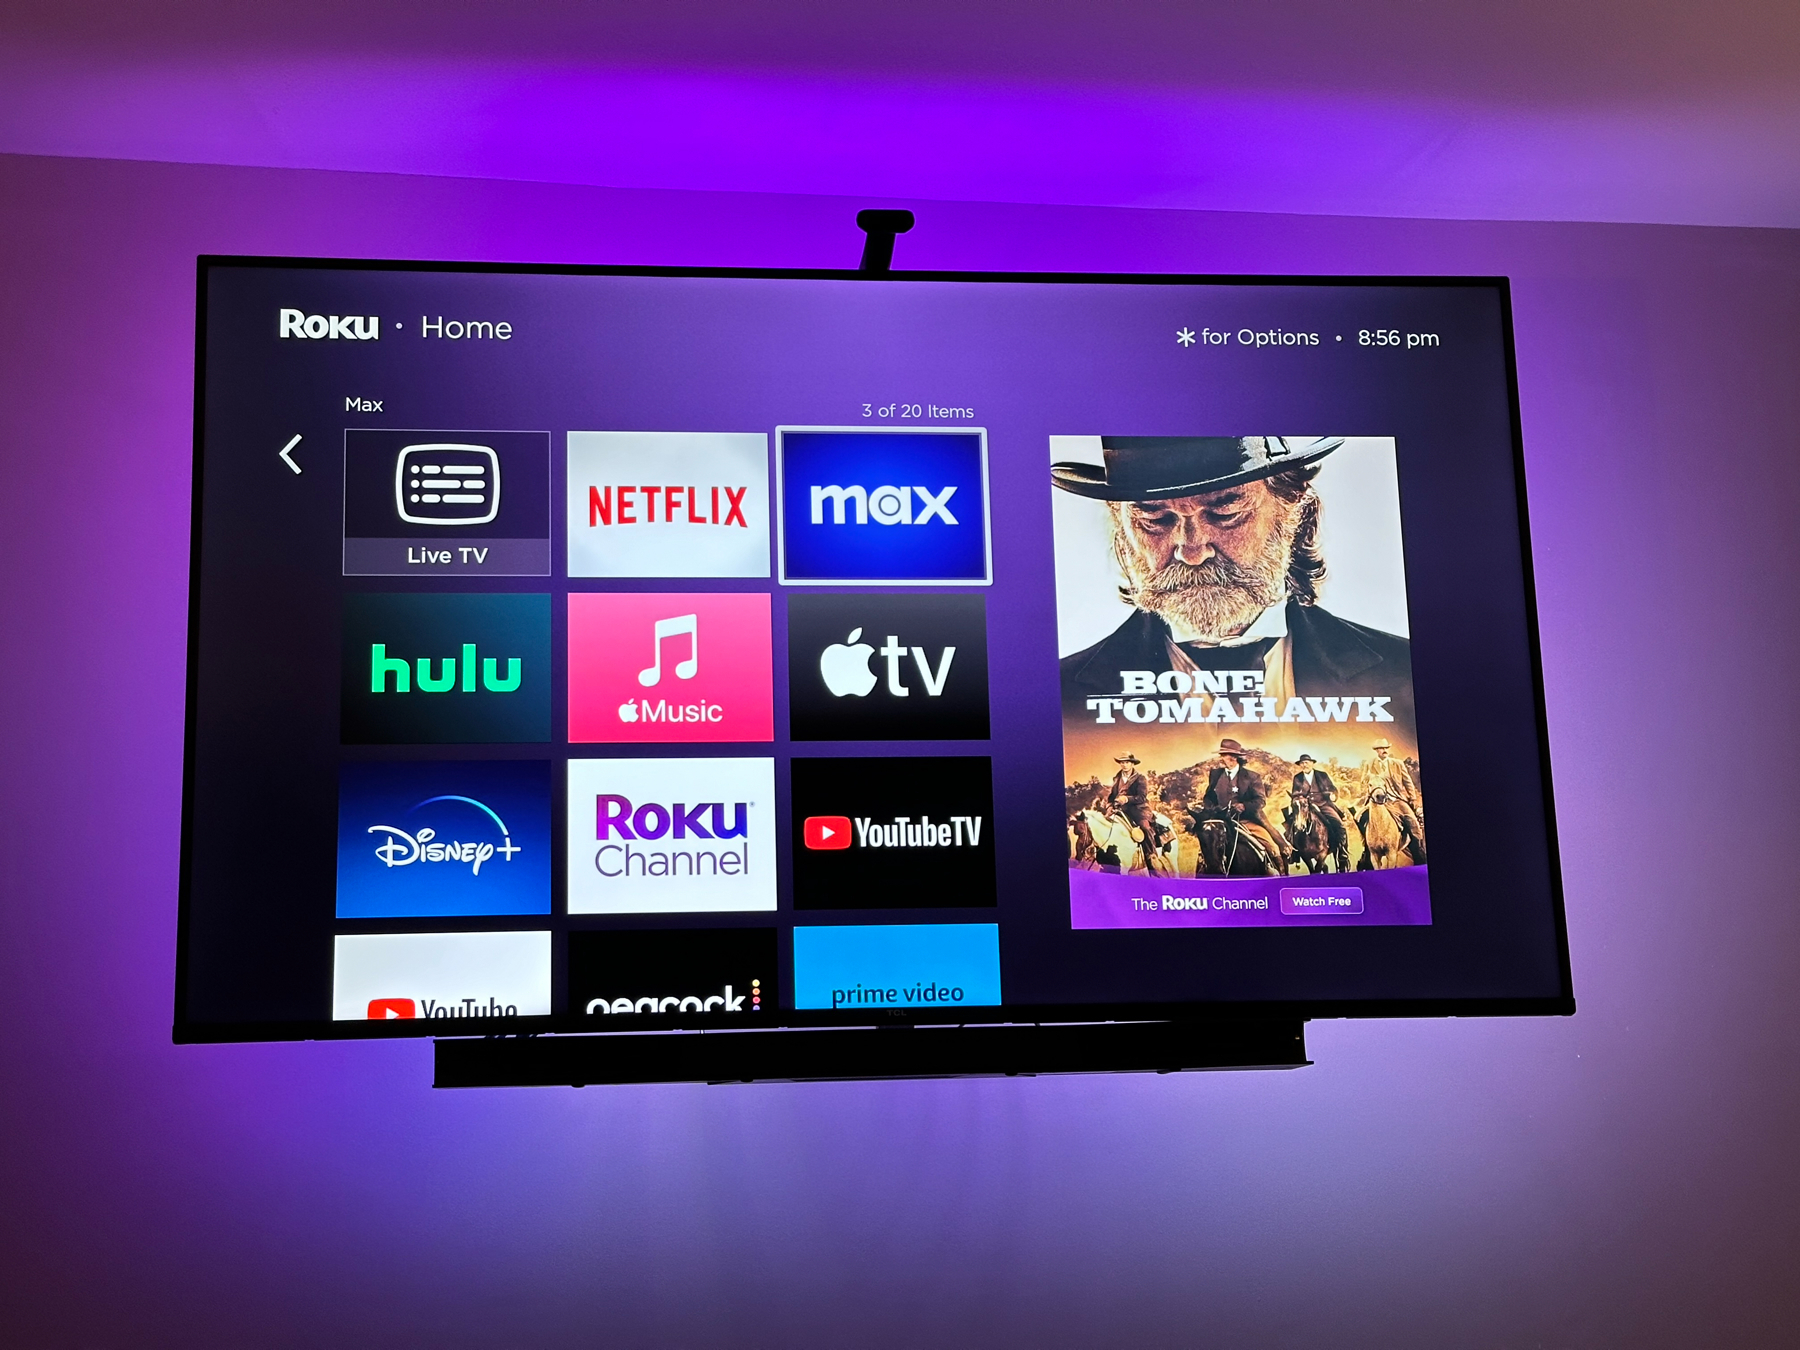 A television mounted on a wall displays the Roku home screen, featuring app icons such as Netflix, Hulu, Disney+, and others. On the right side, there is a highlighted movie poster for “Bone Tomahawk” visible on The Roku Channel section